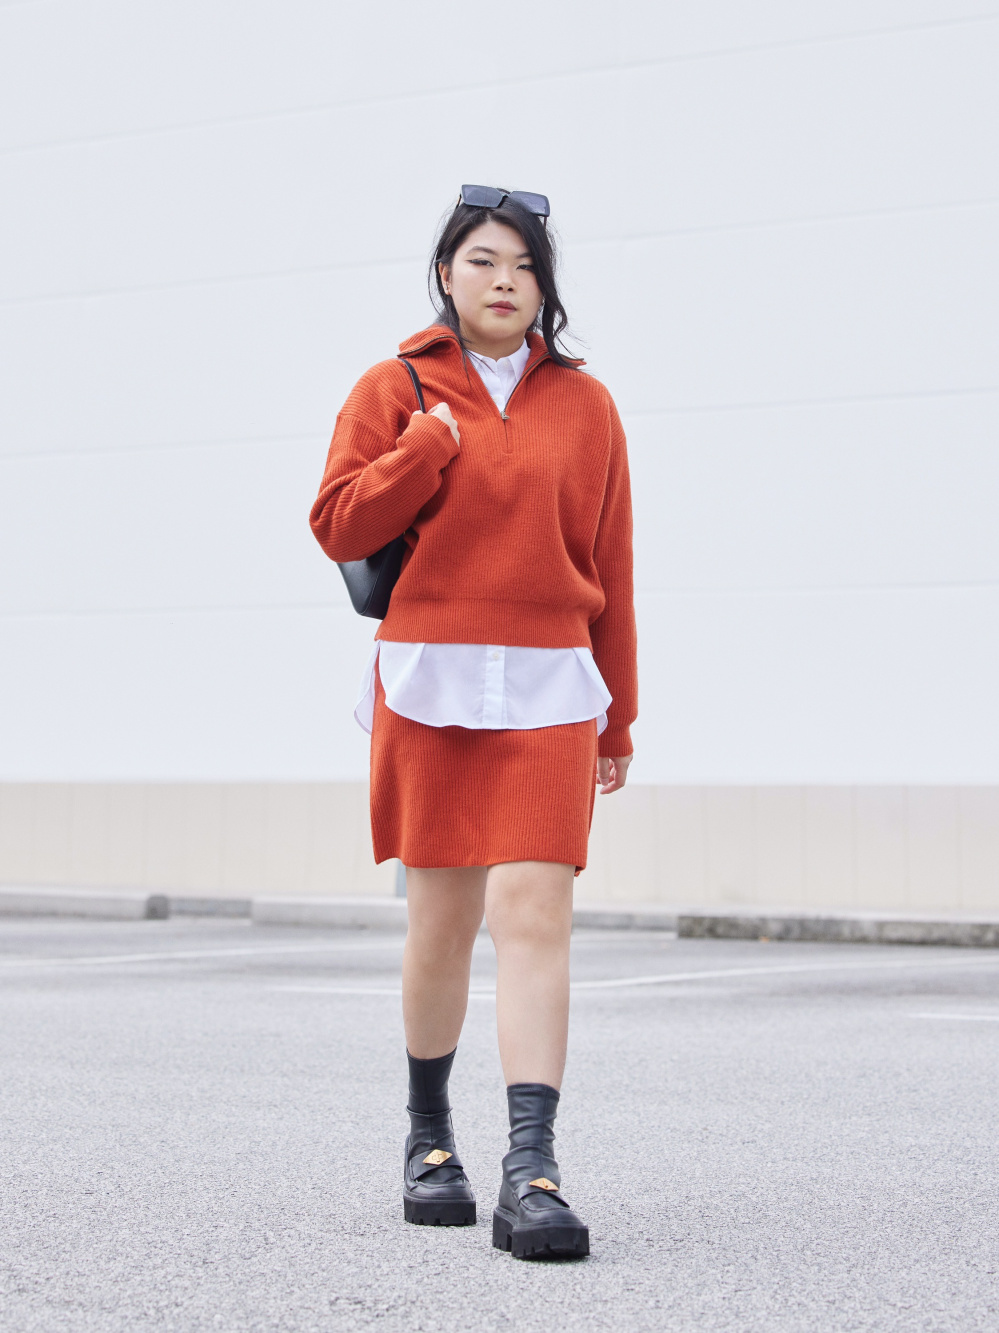 Check styling ideas for「UV Protection Long-Sleeve Shirt Dress」